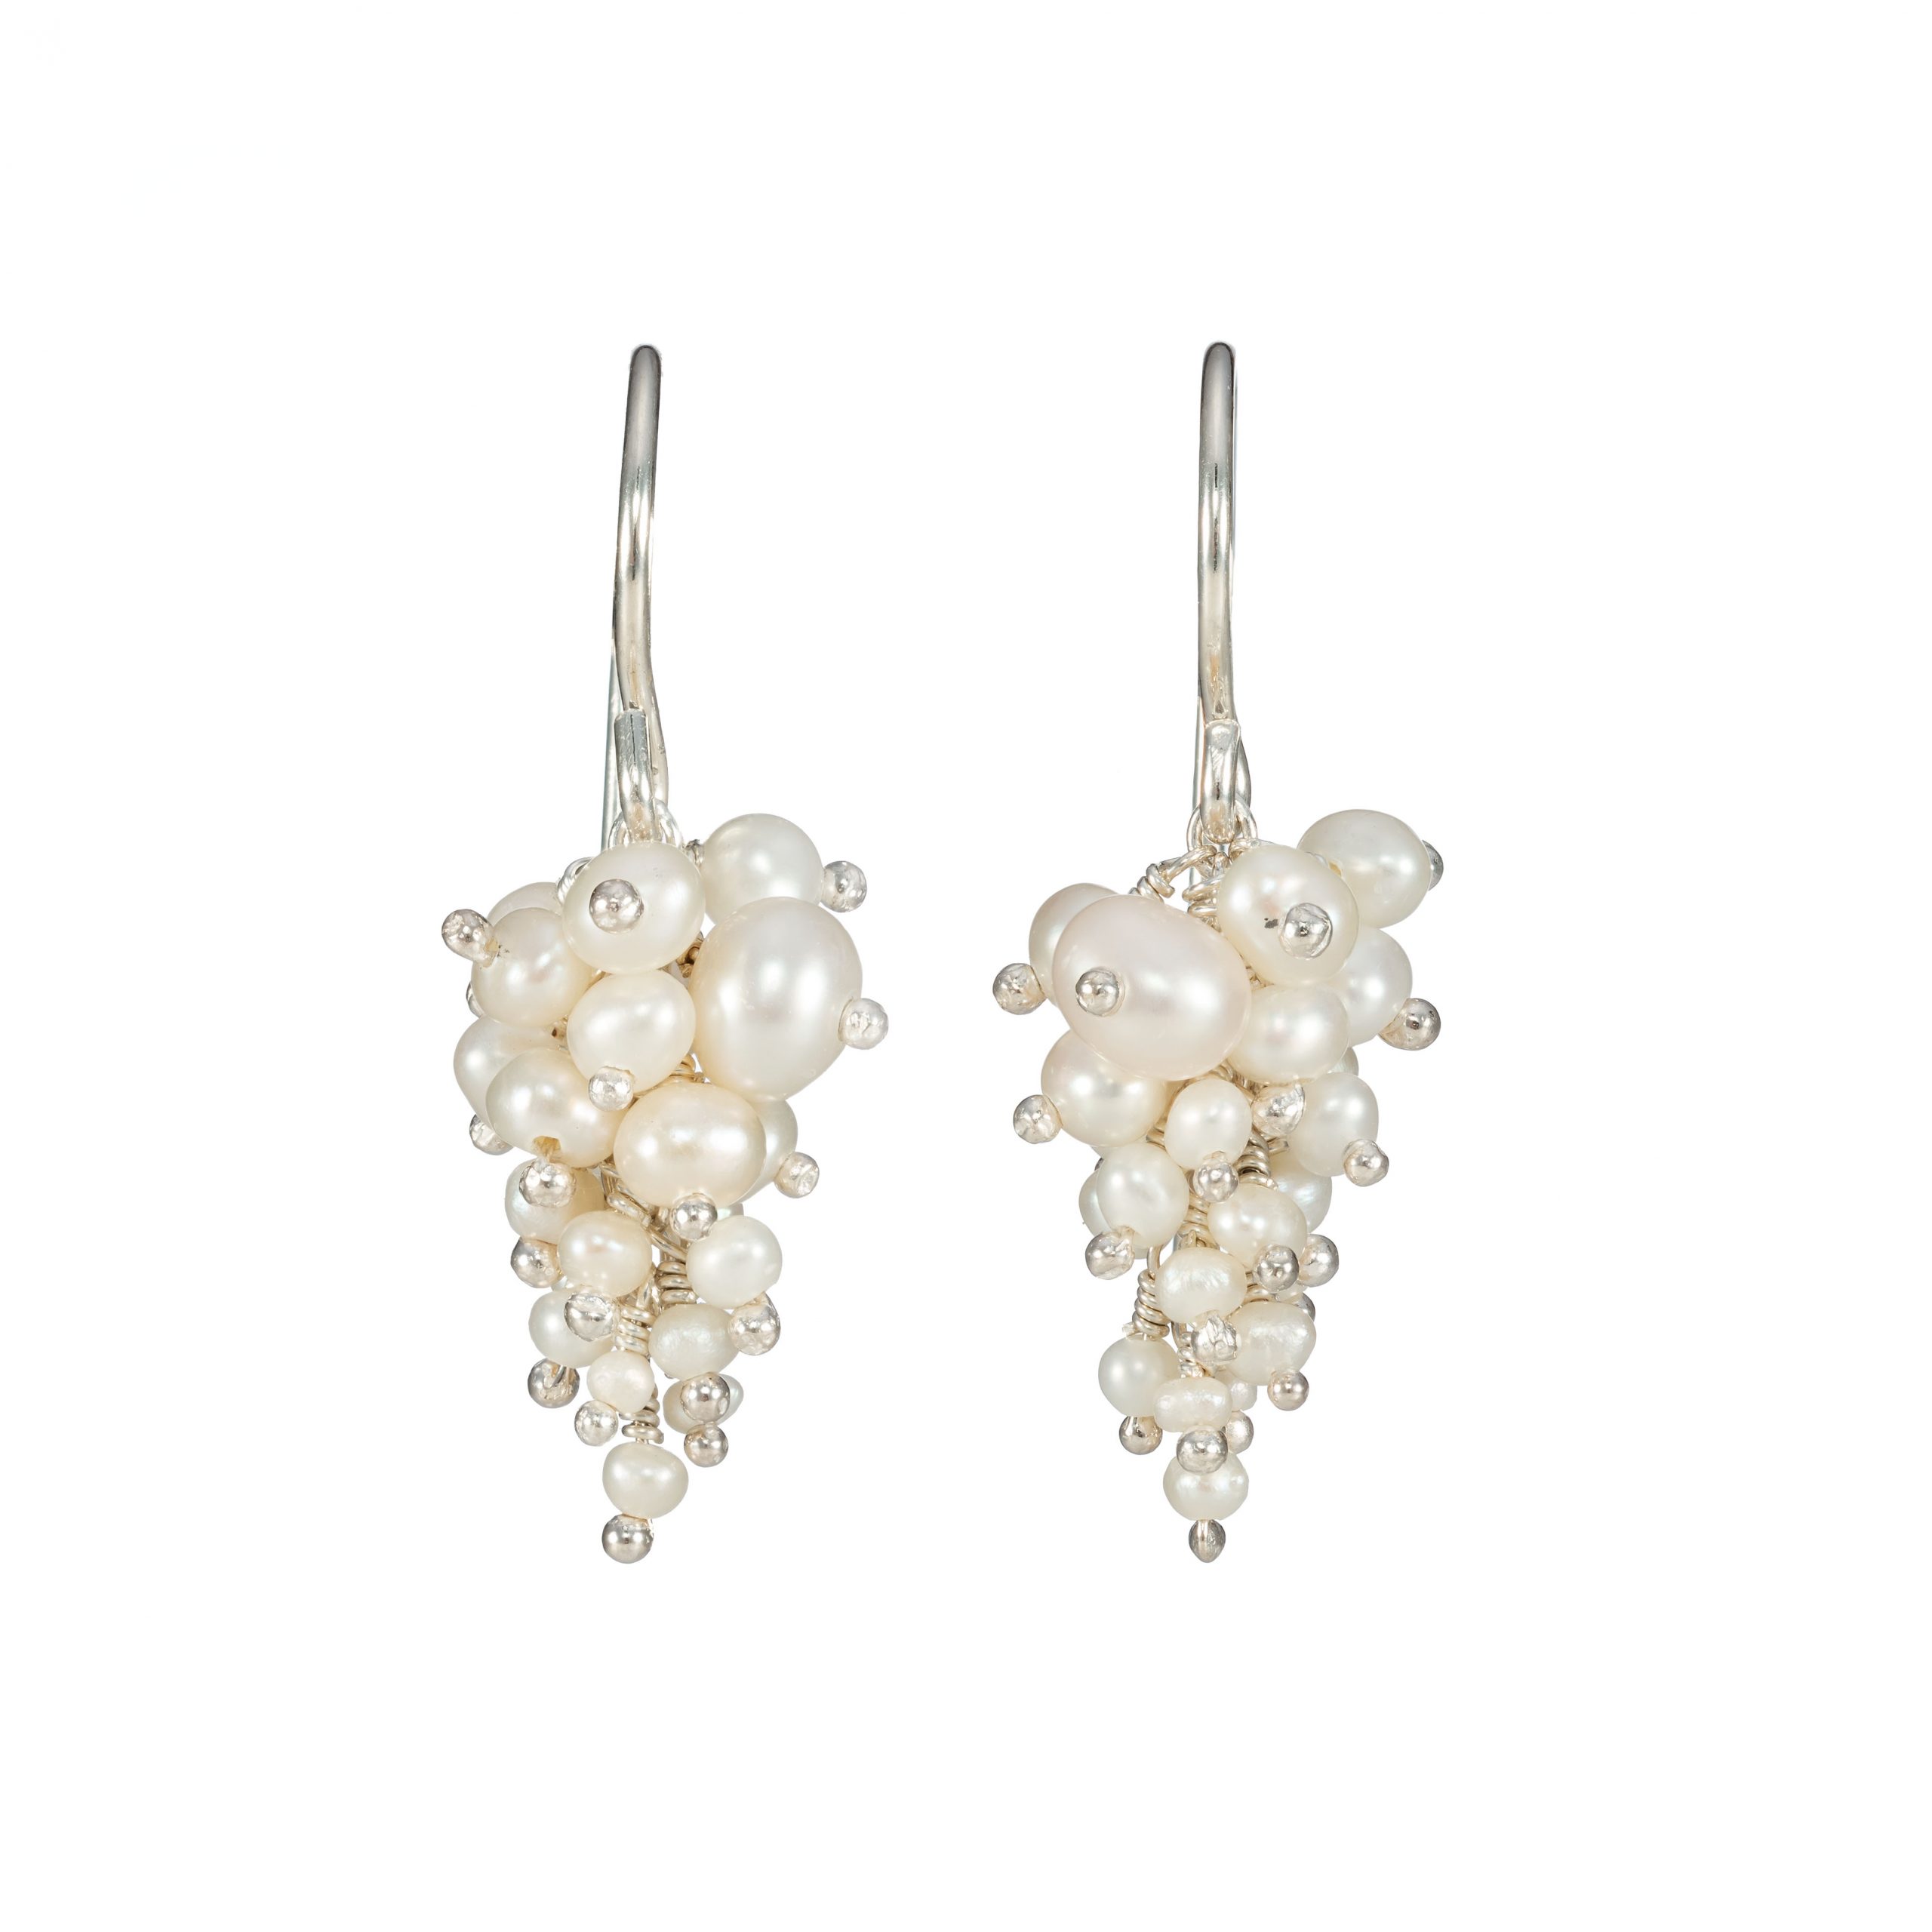 Pearl and silver grape earrings by Kate Wood